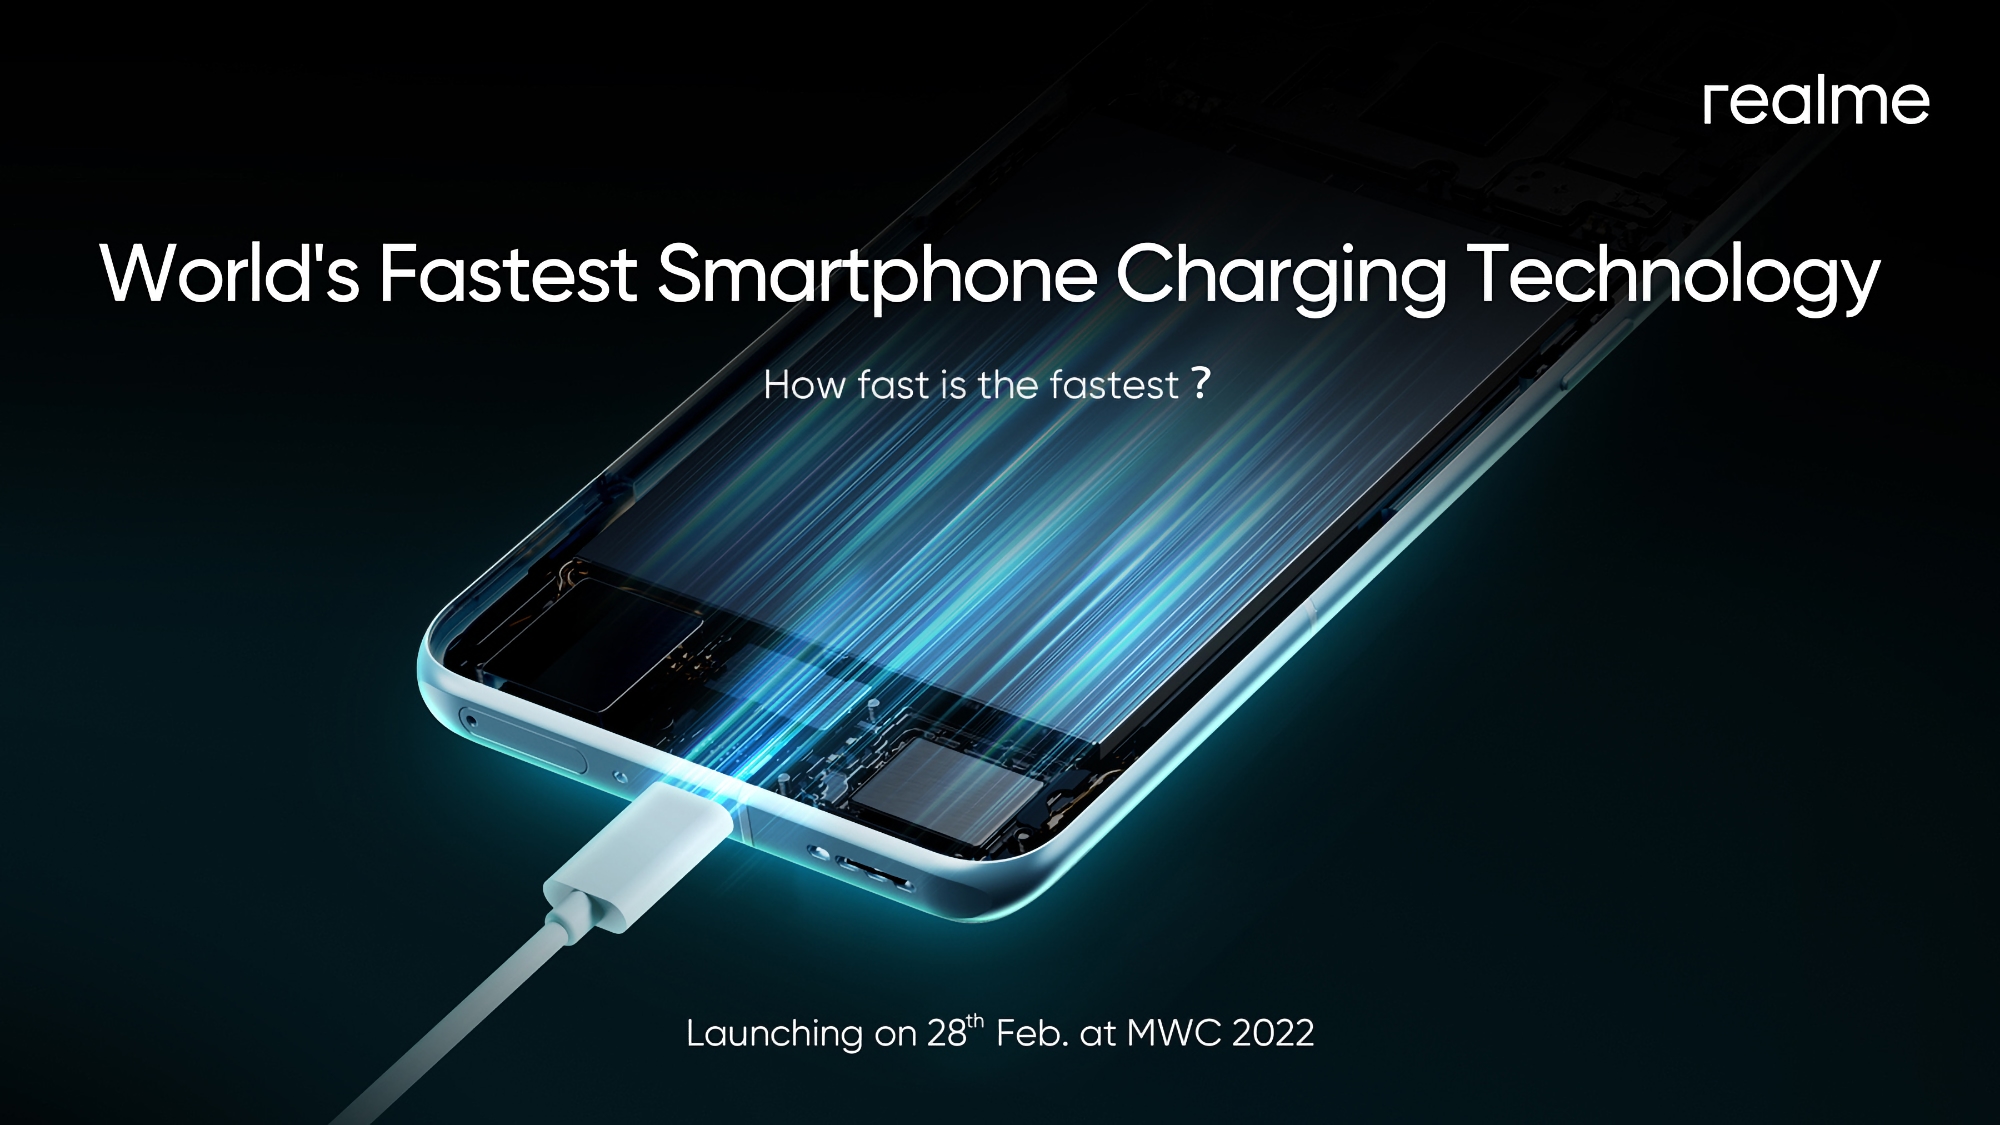 realme to unveil "world's fastest smartphone charging technology" on February 28